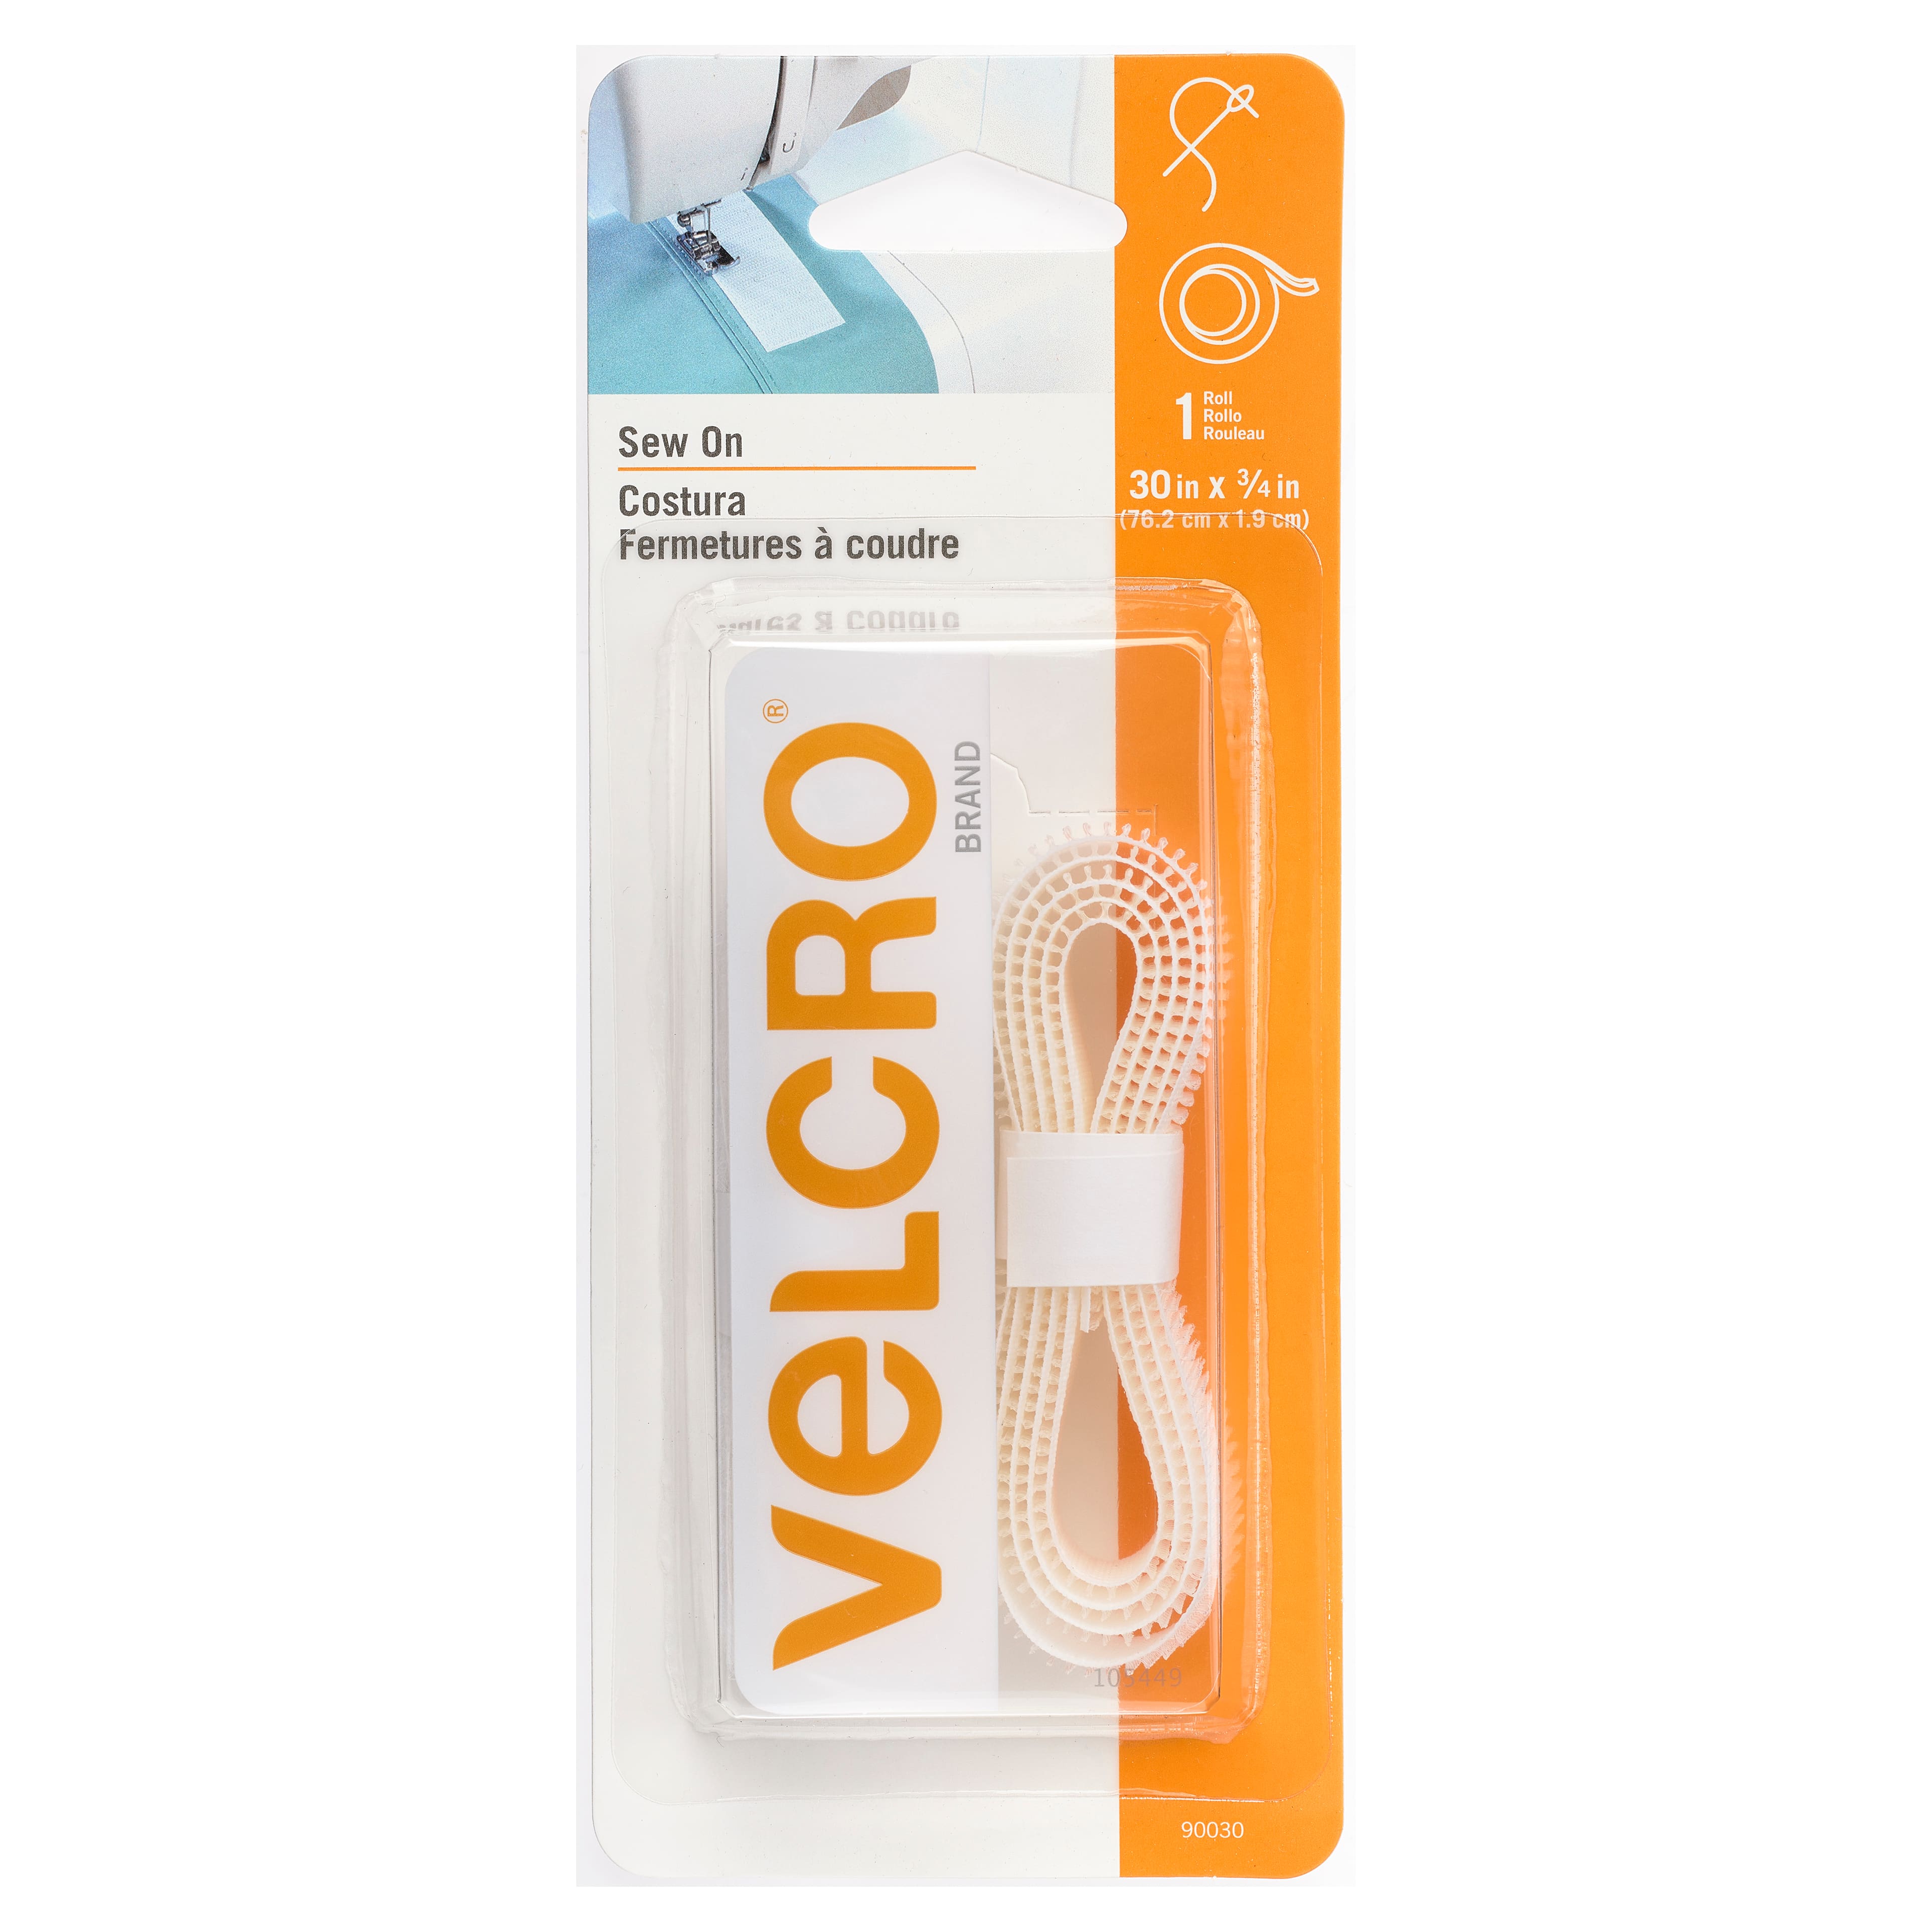 VELCRO Brand For Fabrics  Sew On Fabric Tape for Alterations and